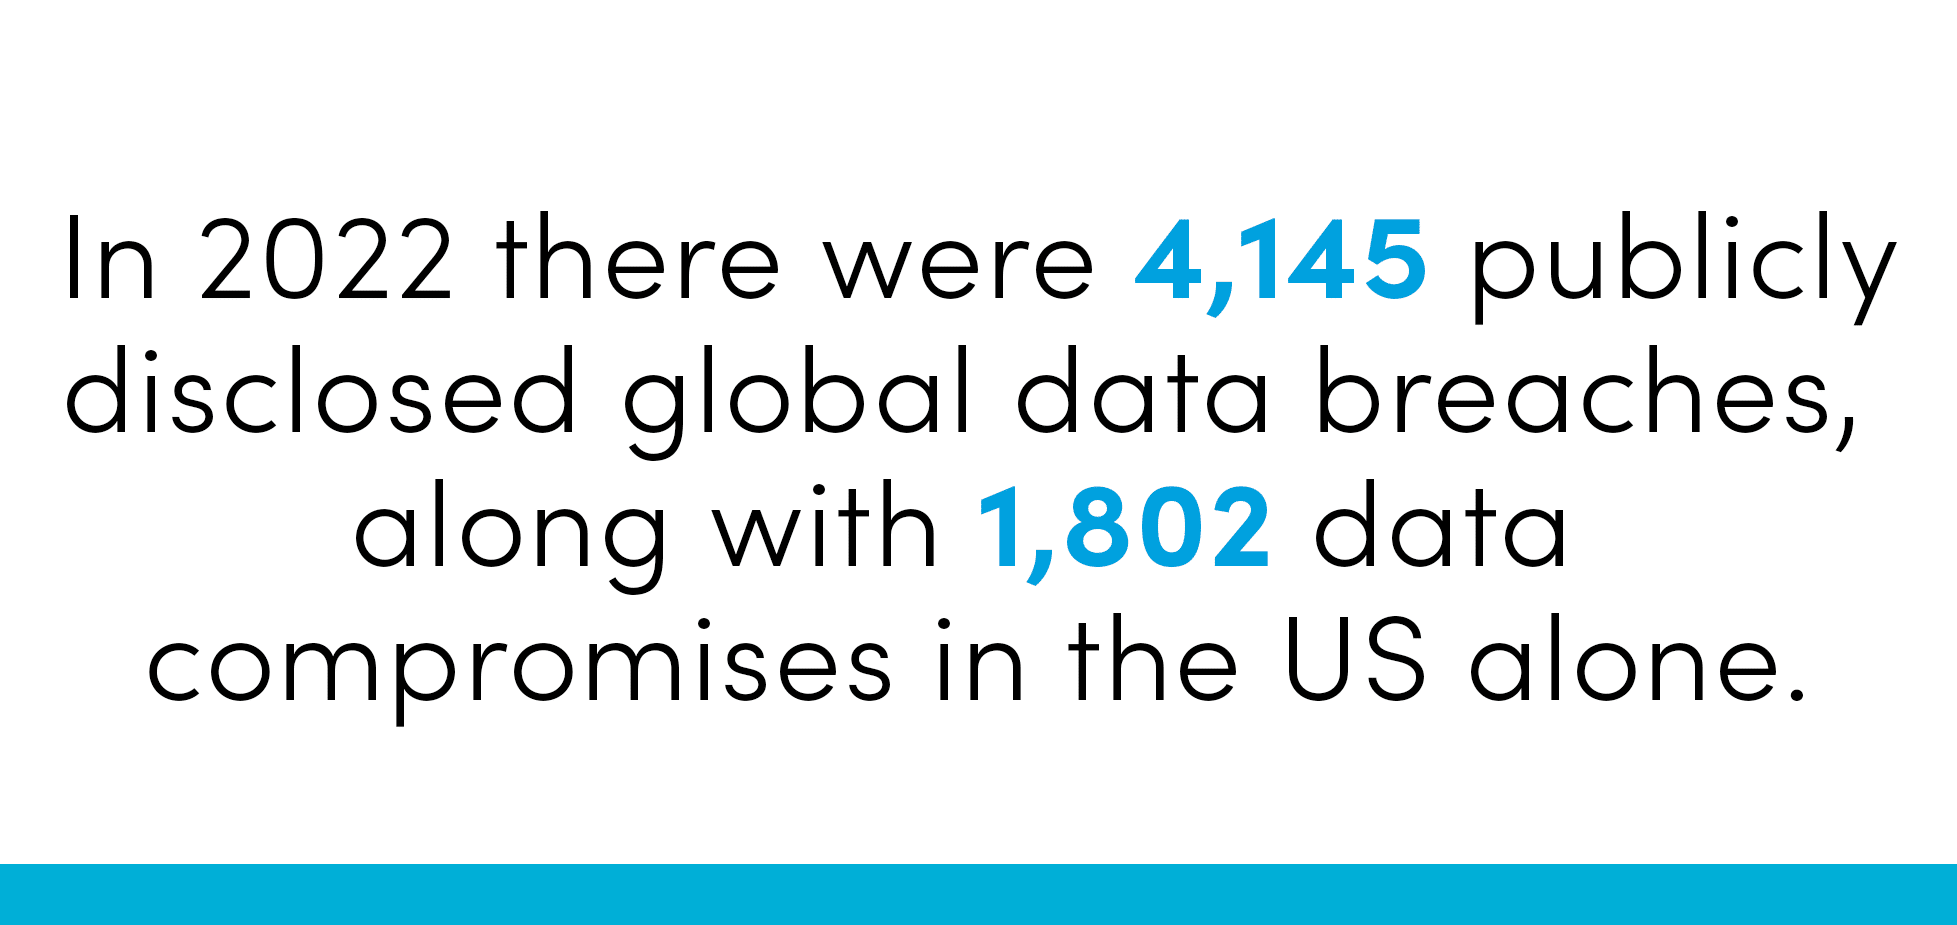 statistic stating In 2022 there were 4,145 publicly disclosed global data breaches, along with 1,802 data compromises in the US alone